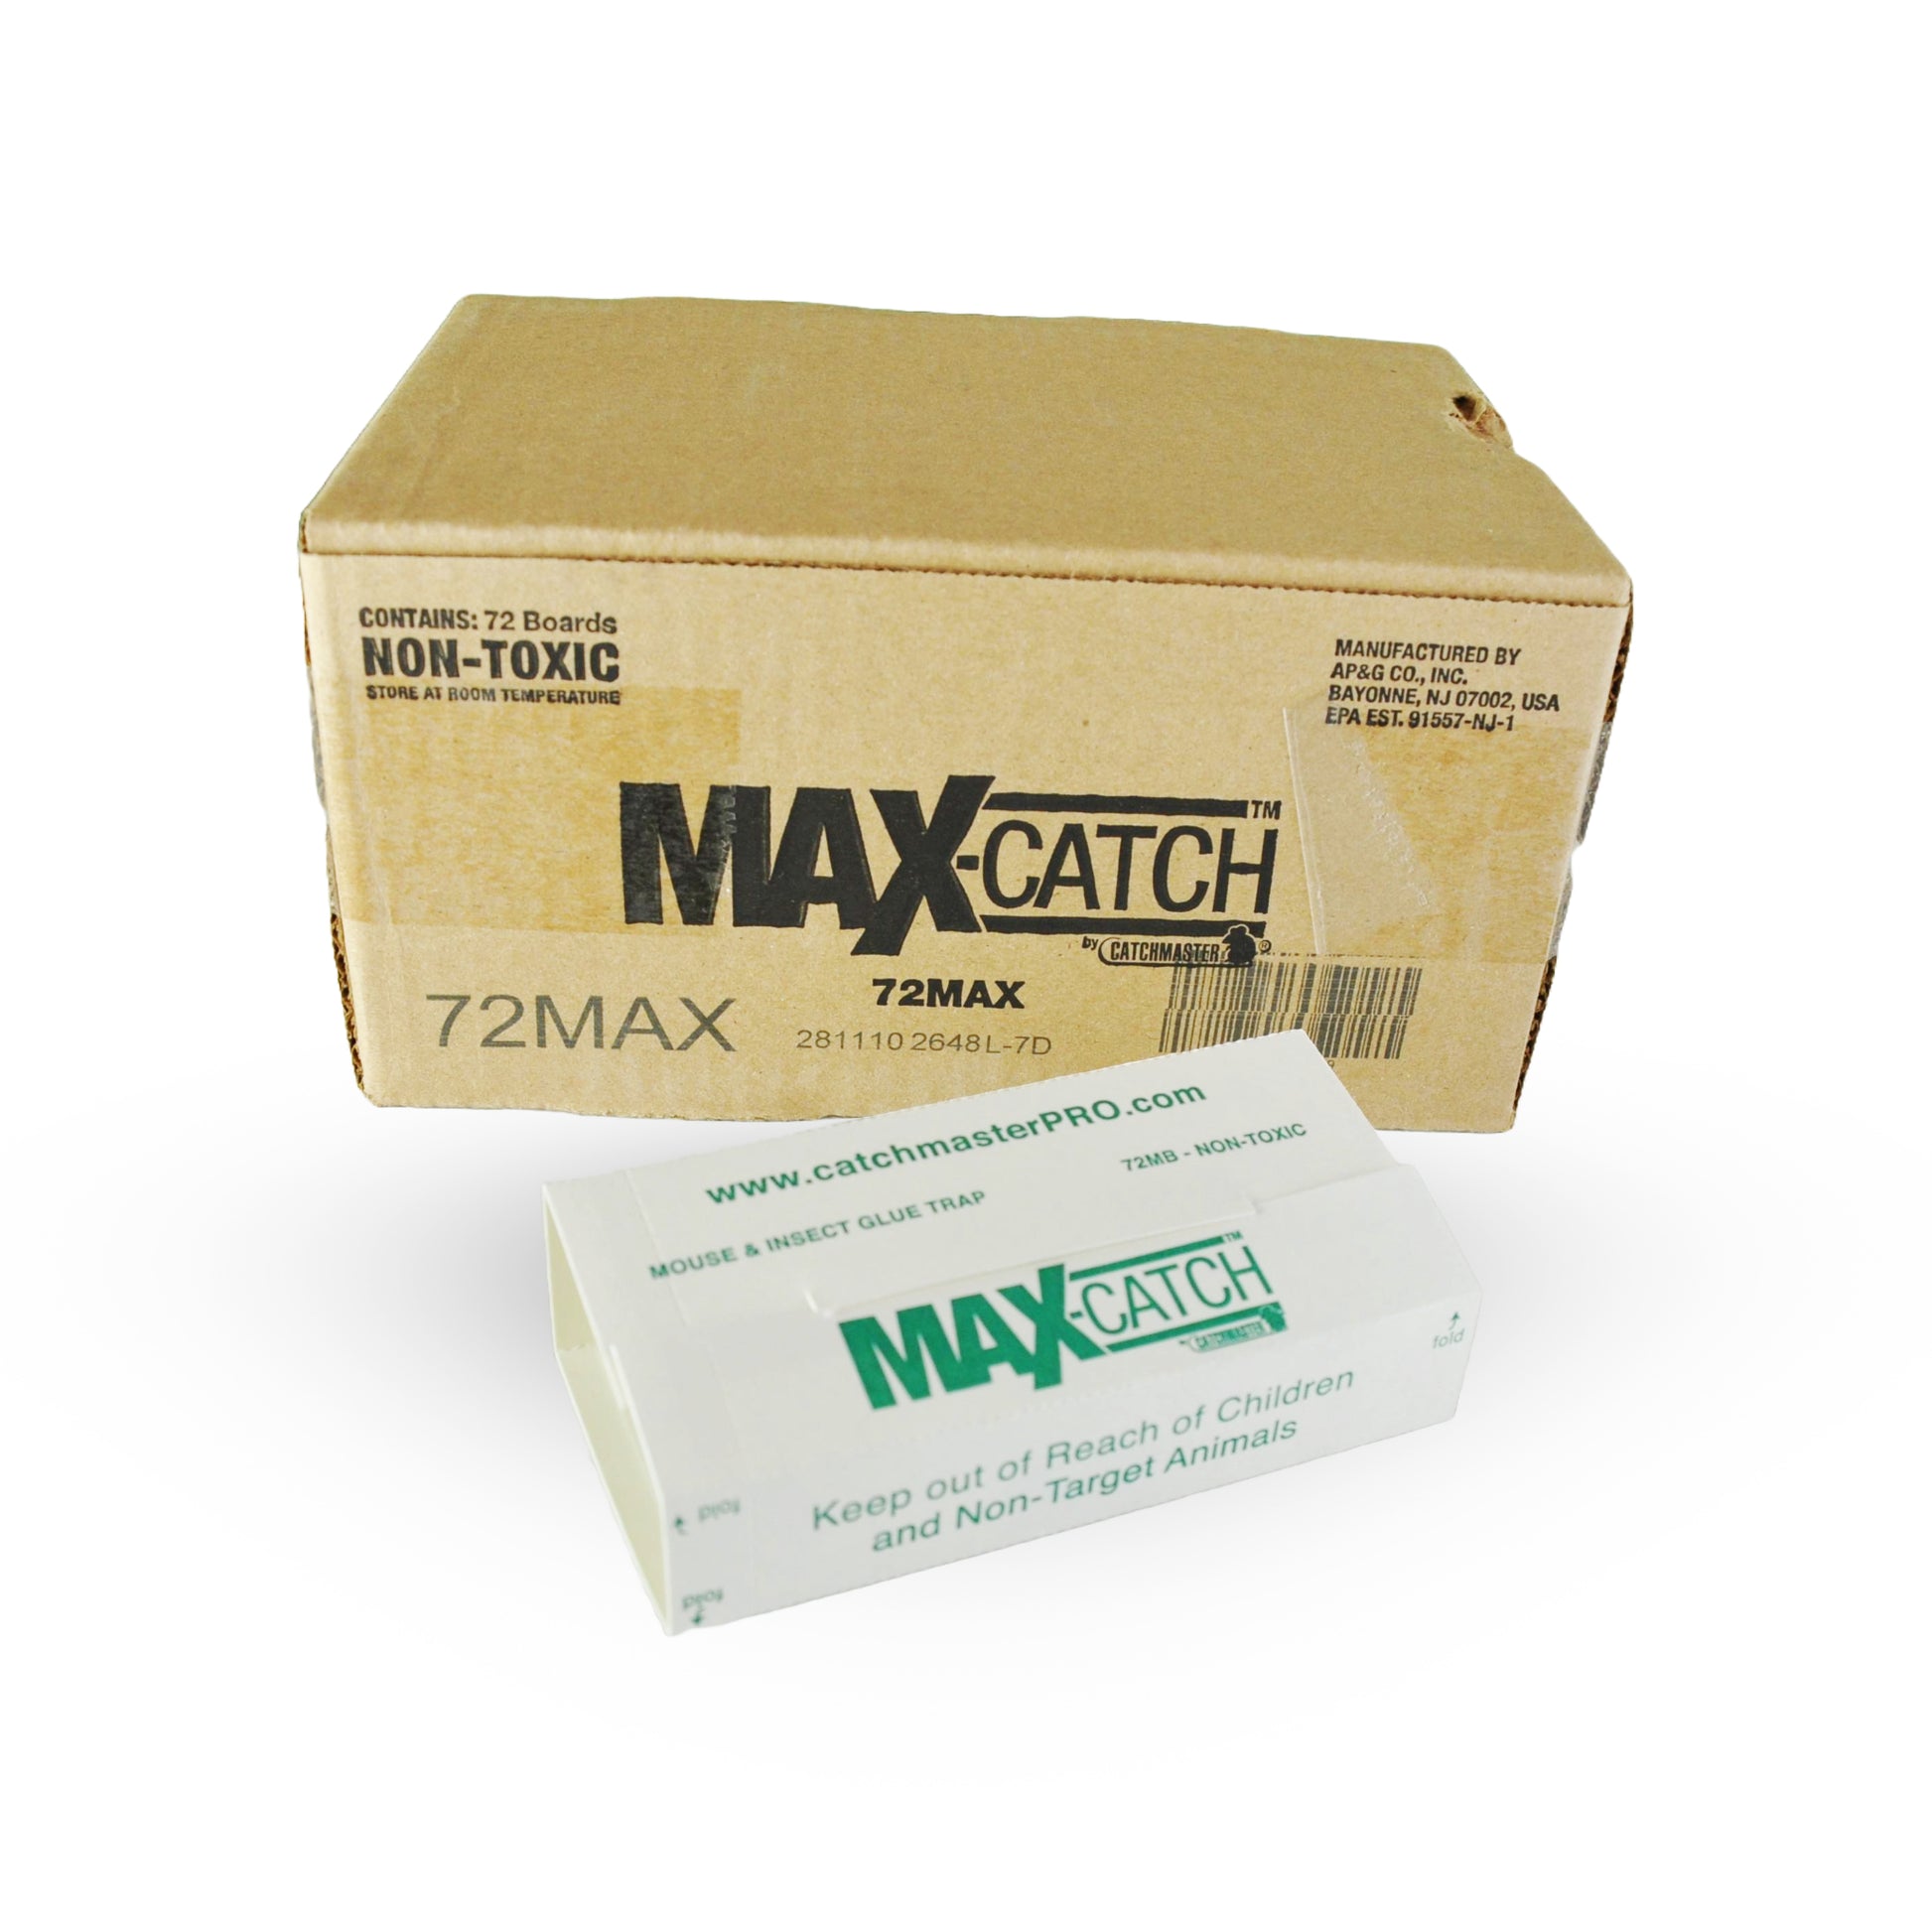 MAX-CATCH, Sticky Trap for Insects and Mice